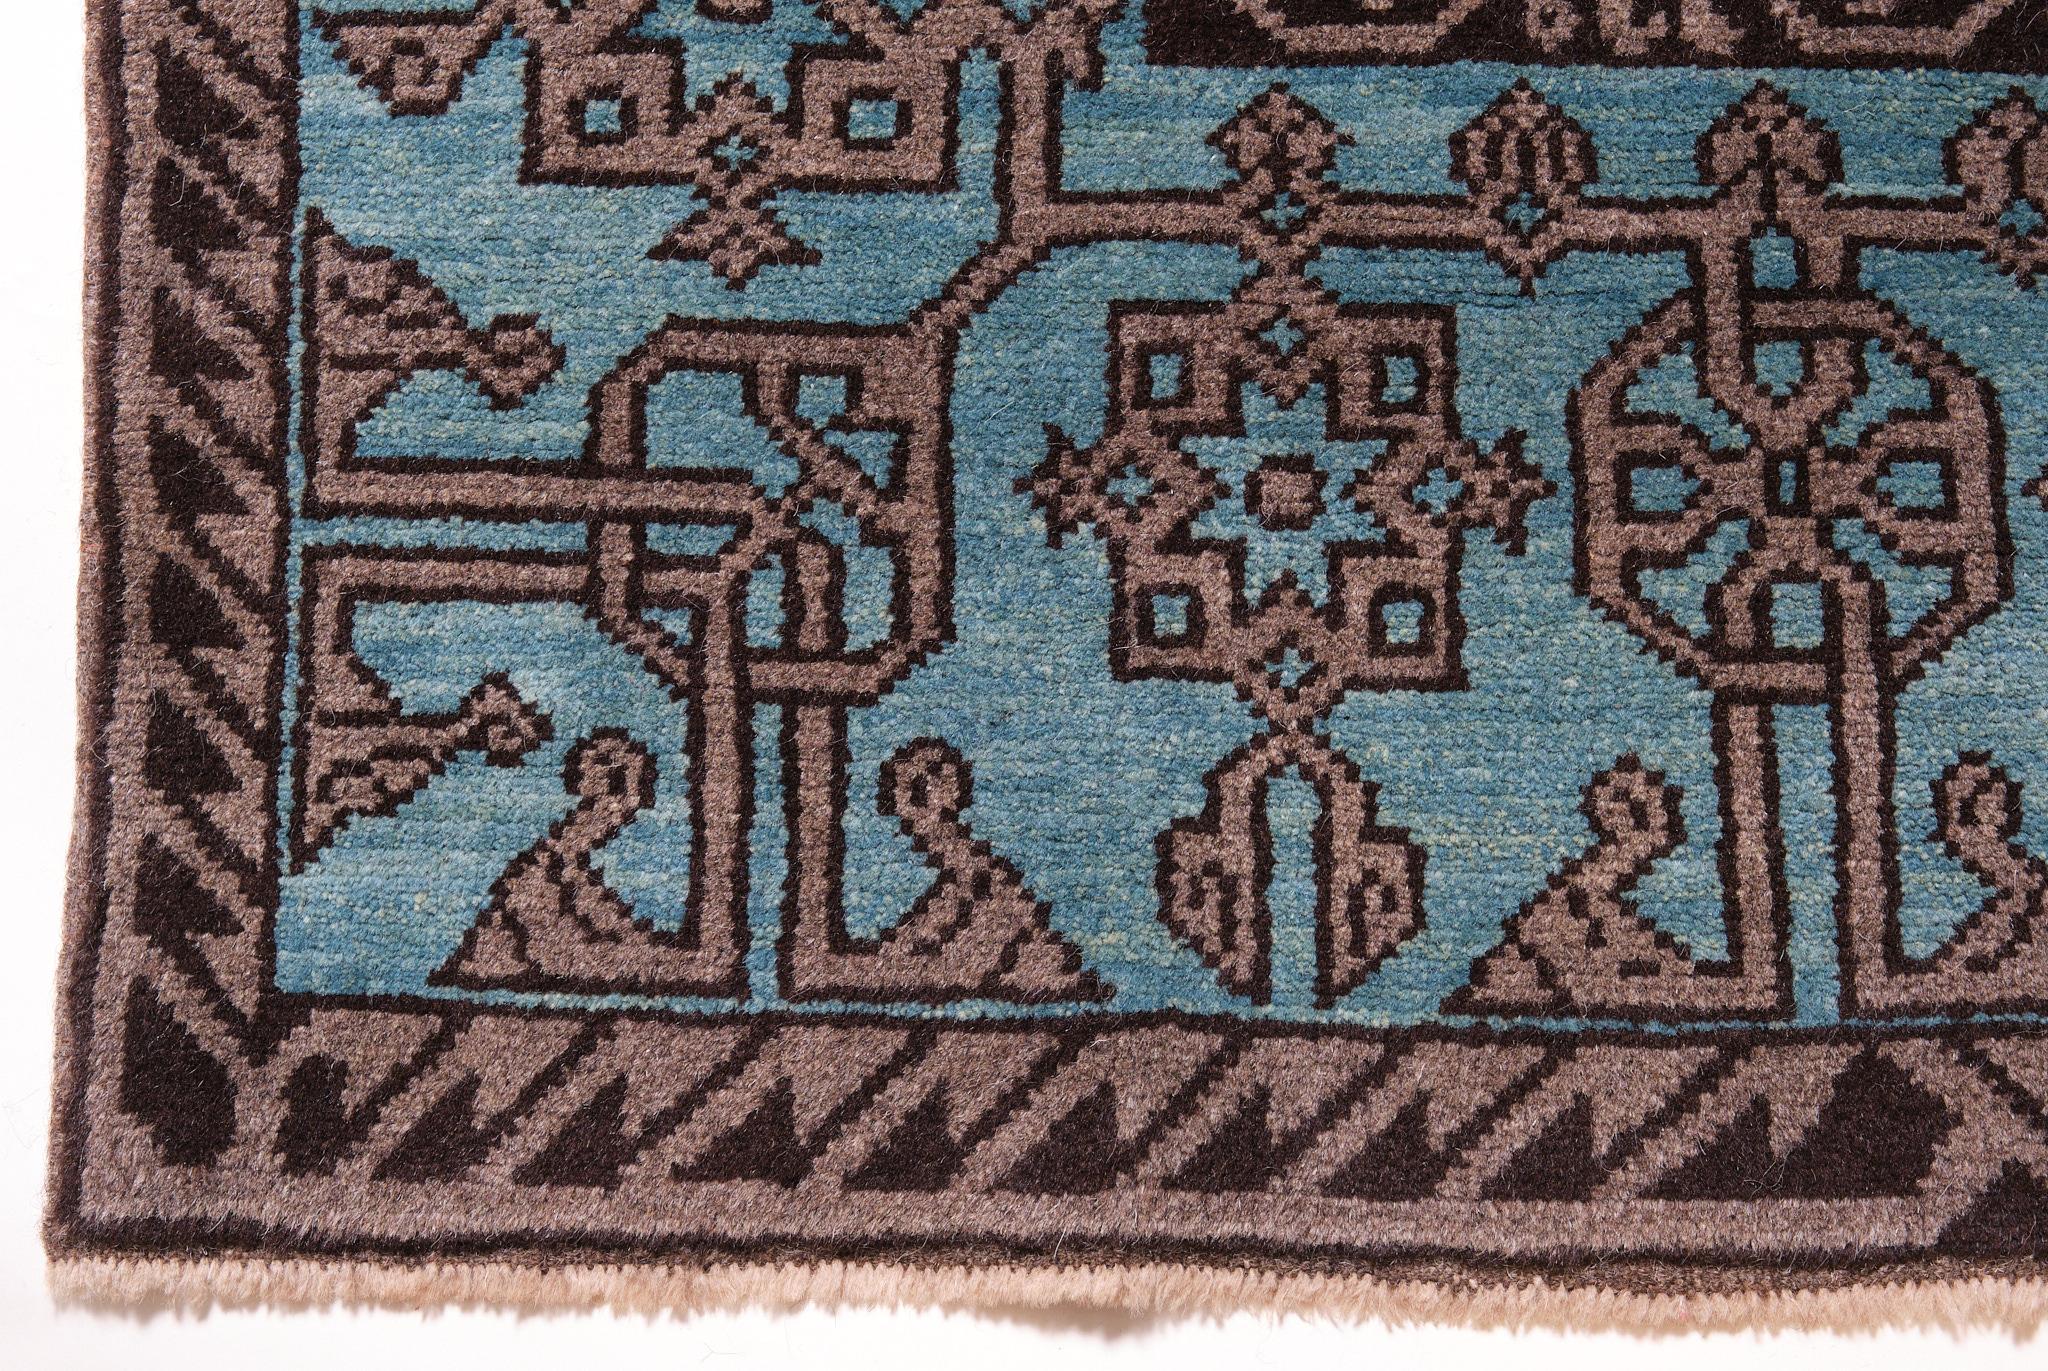 The source of the carpet comes from the book Turkish Carpets from the 13th – 18th centuries, Ahmet Ertug, 1996 pl.9. This 13th-century carpet is from Ulu Mosque, Divrigi Sivas region, central Anatolia. The Seljuk period marks one of the highest